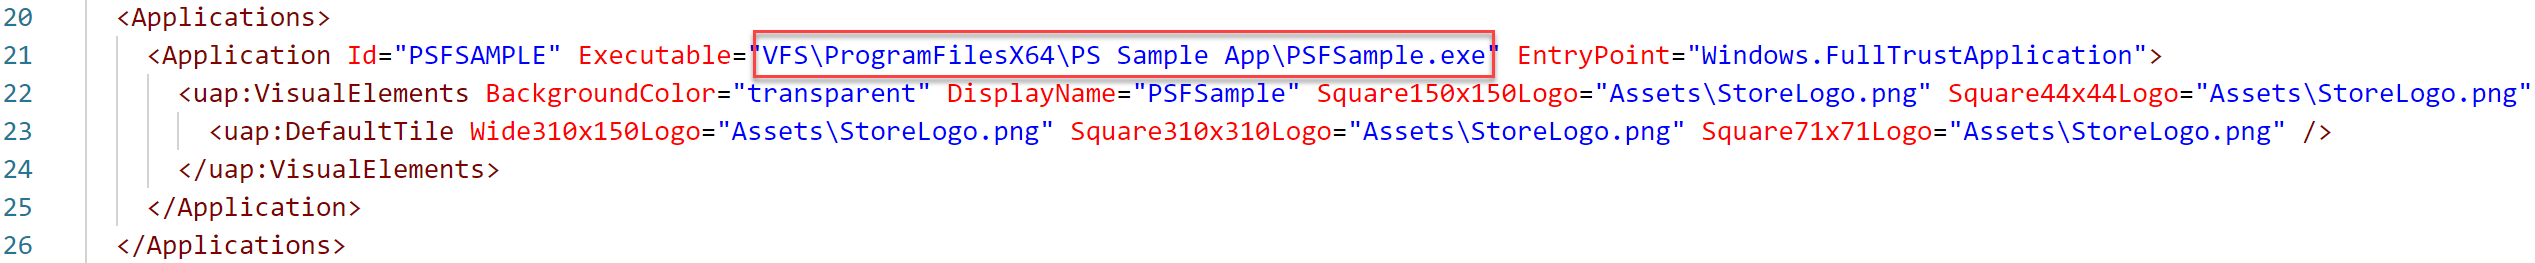 Image circling the location of the executable within the AppxManifest file.